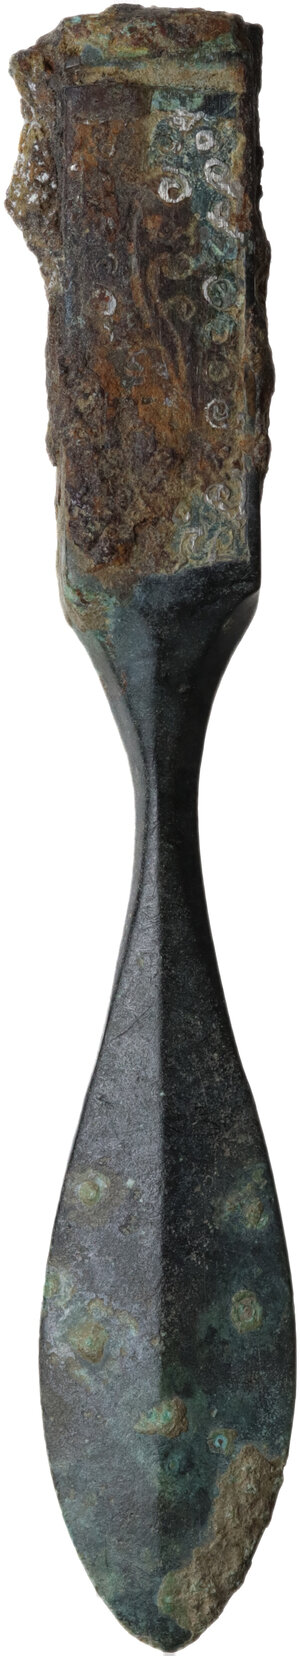 reverse: Late Roman period, Balkans. Bronze tool. Handle elaborately decorated with floral patterns, some silvering in the lines of the pattern.  78 mm